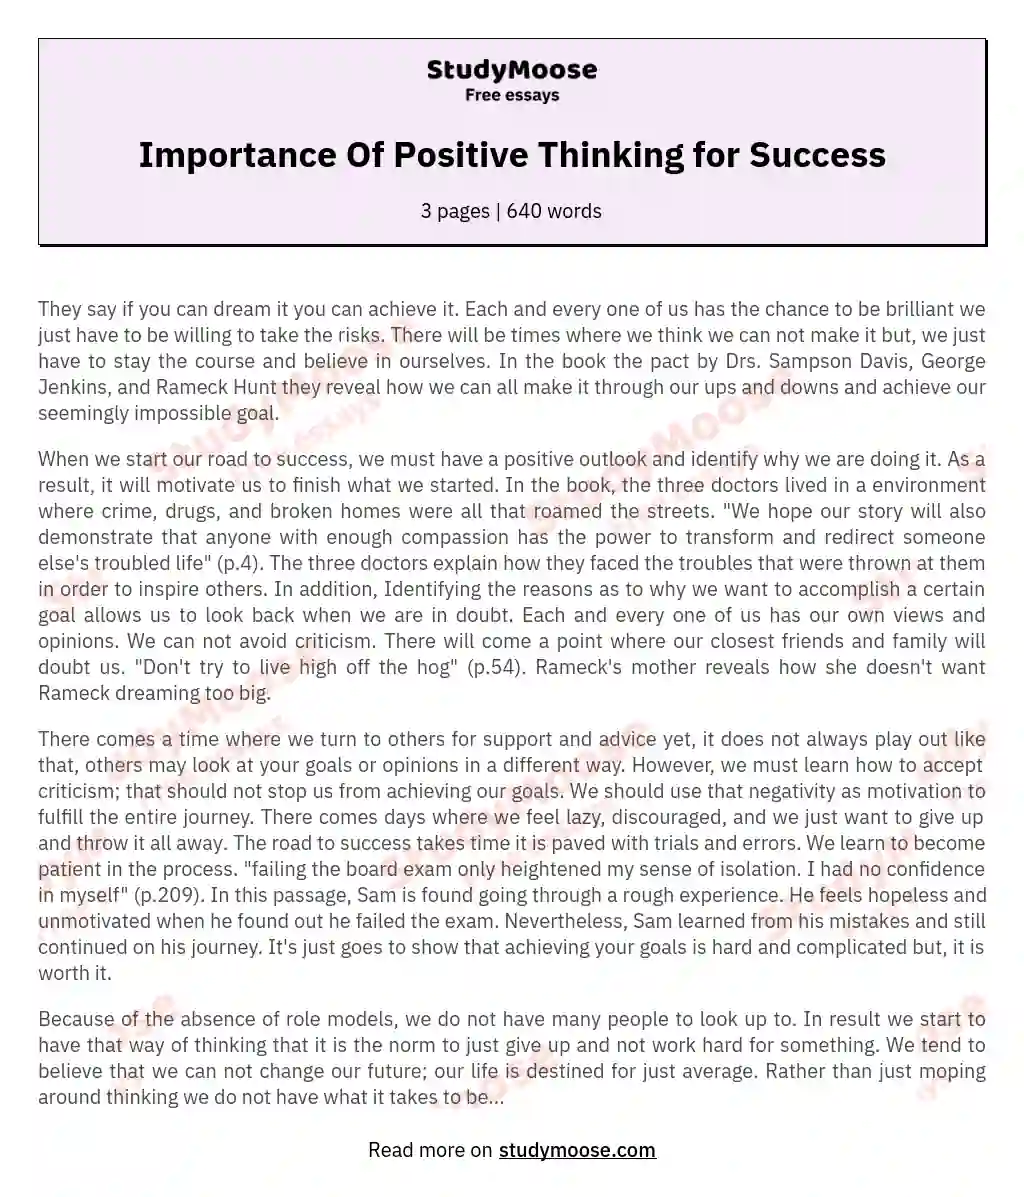 essay on power of positive thinking